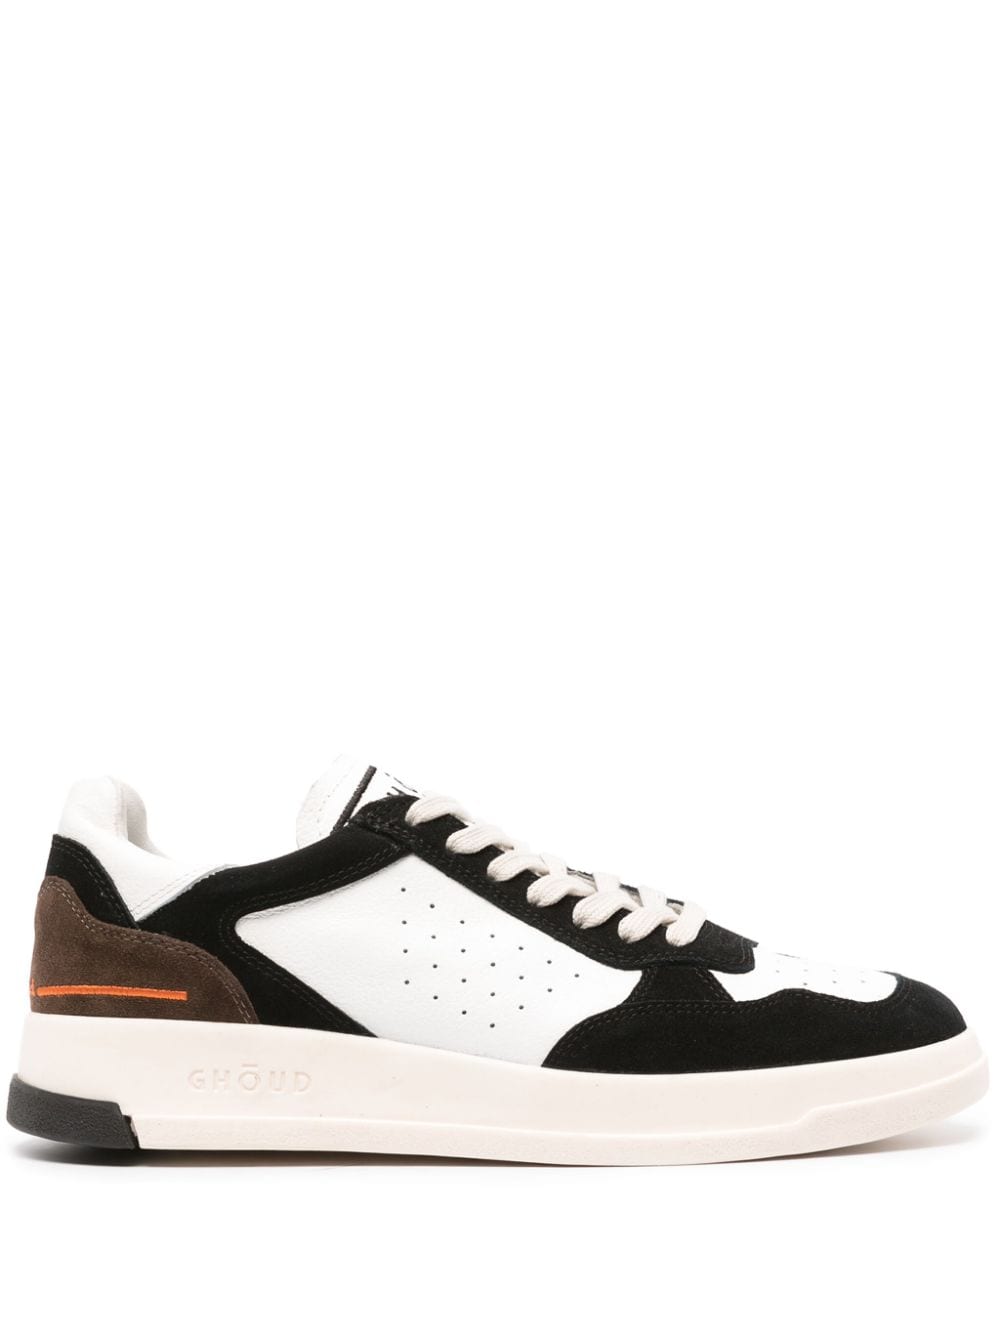 GHŌUD panelled leather sneakers